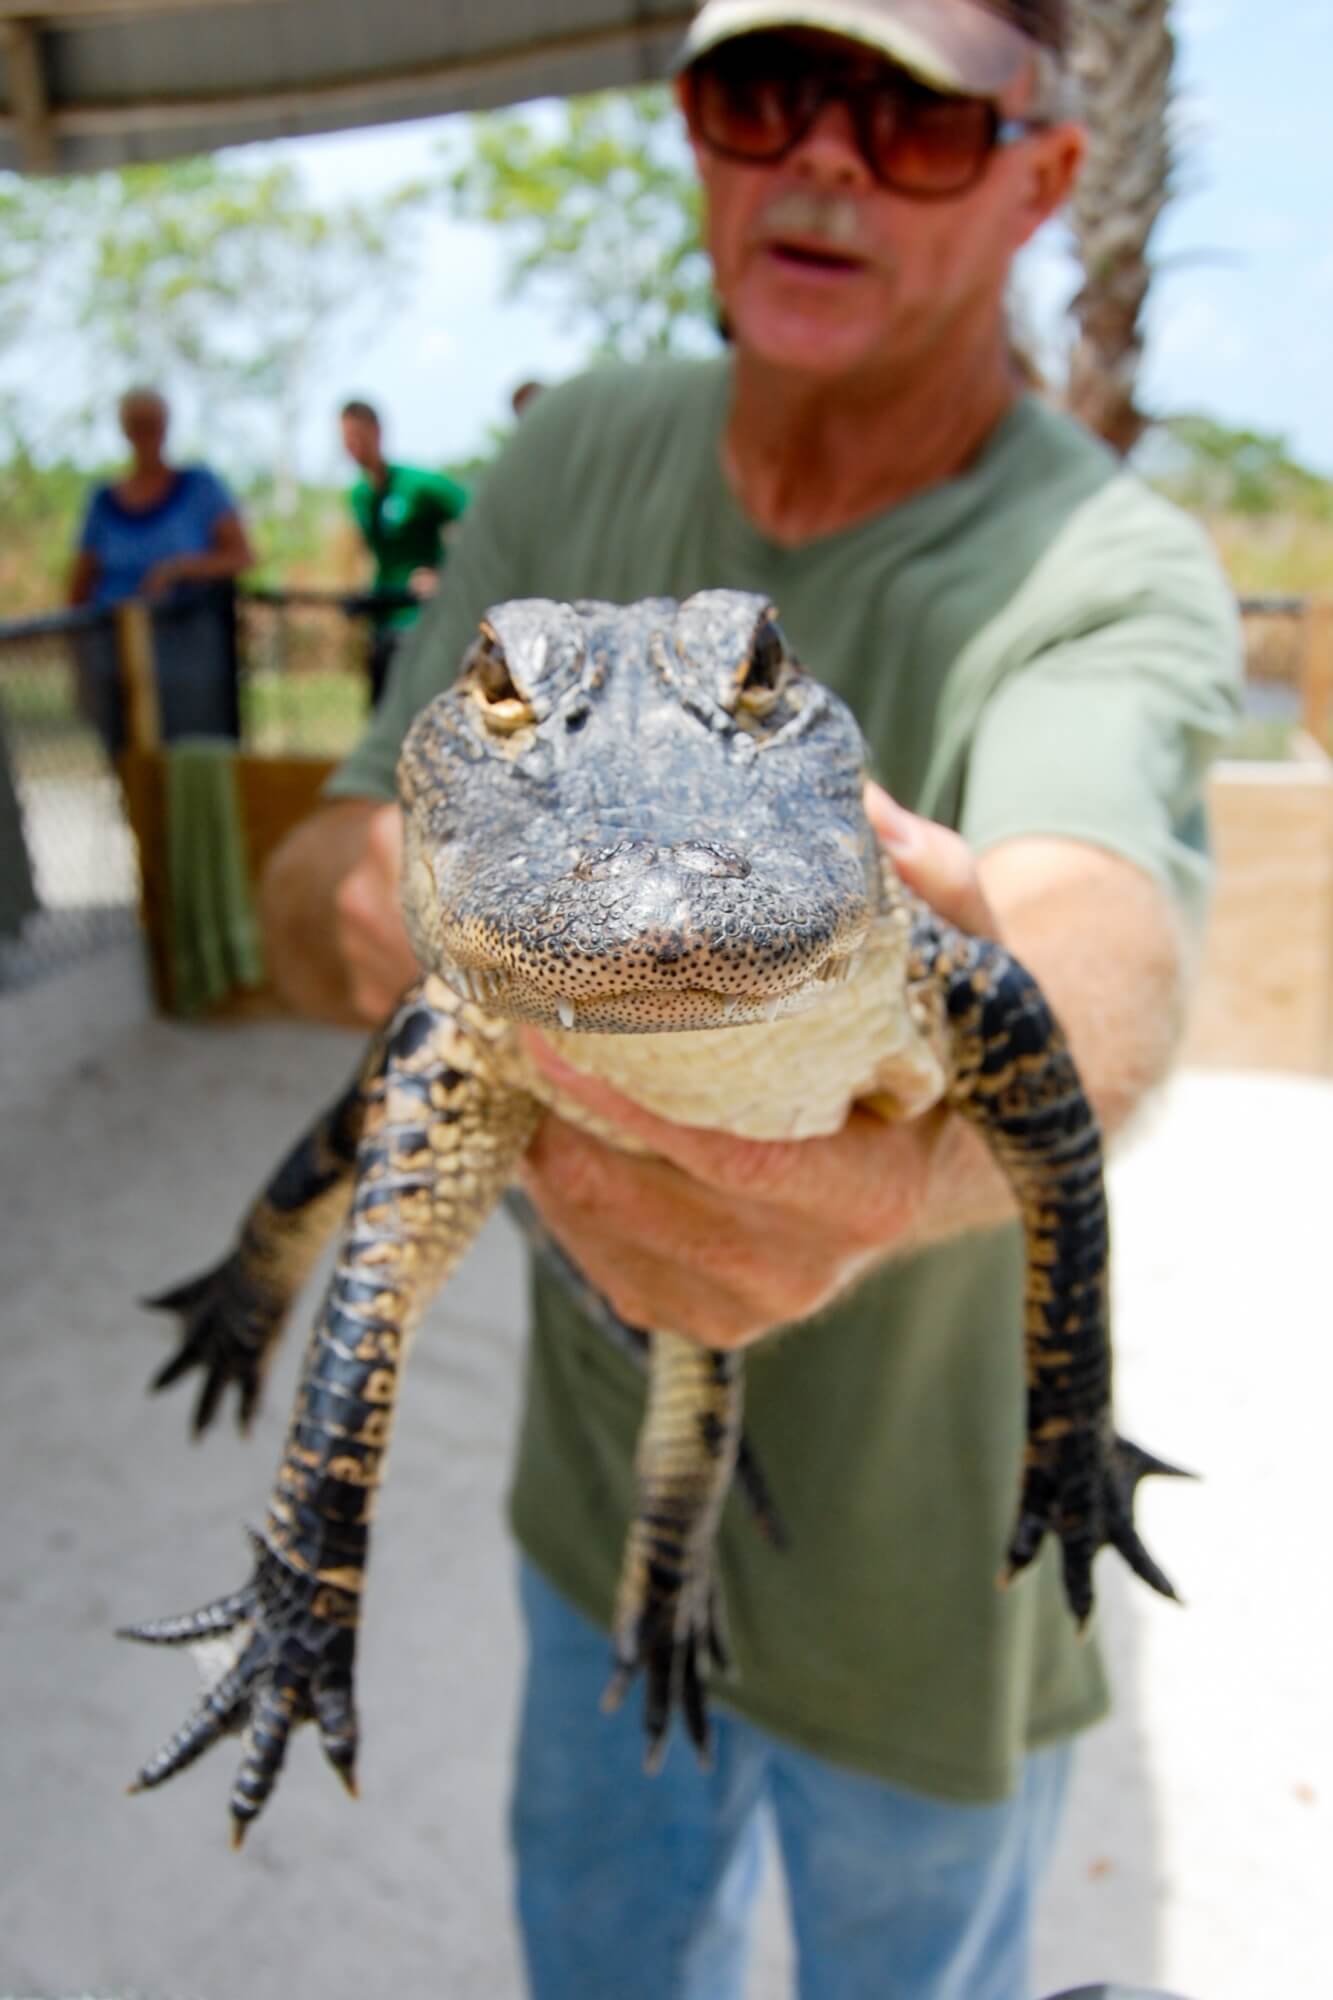 MustDo.com | Man holding a young alligator at Wooten's Everglades Airboat, Animal Sanctuary & Alligator Park near Naples, Florida.